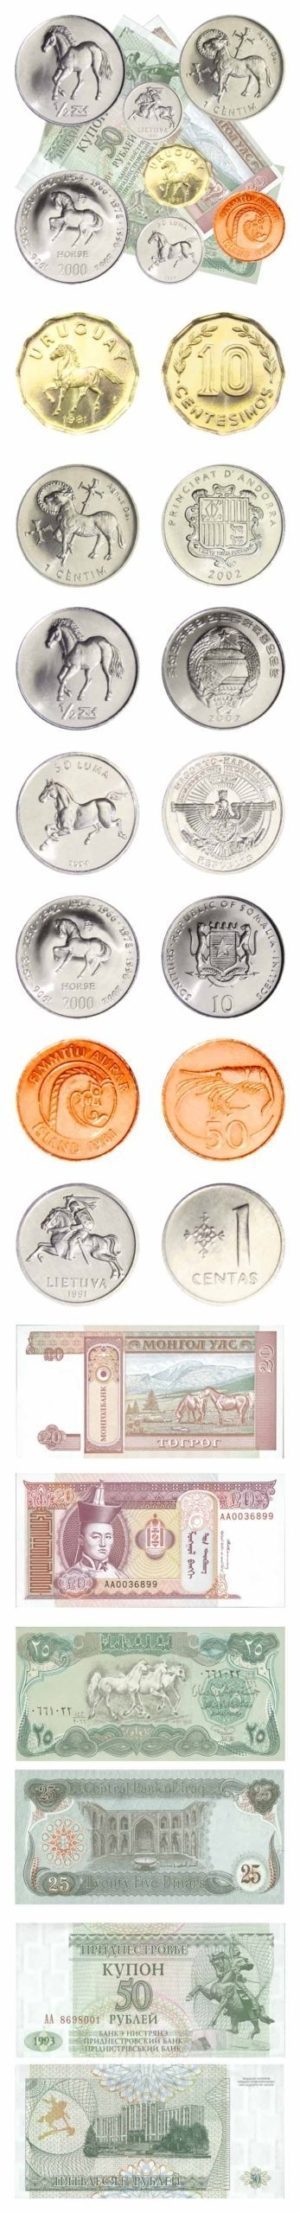 Equine Group - Horse Coin & Currency Set - (7) Coins - (3) Banknotes - All Uncirculated